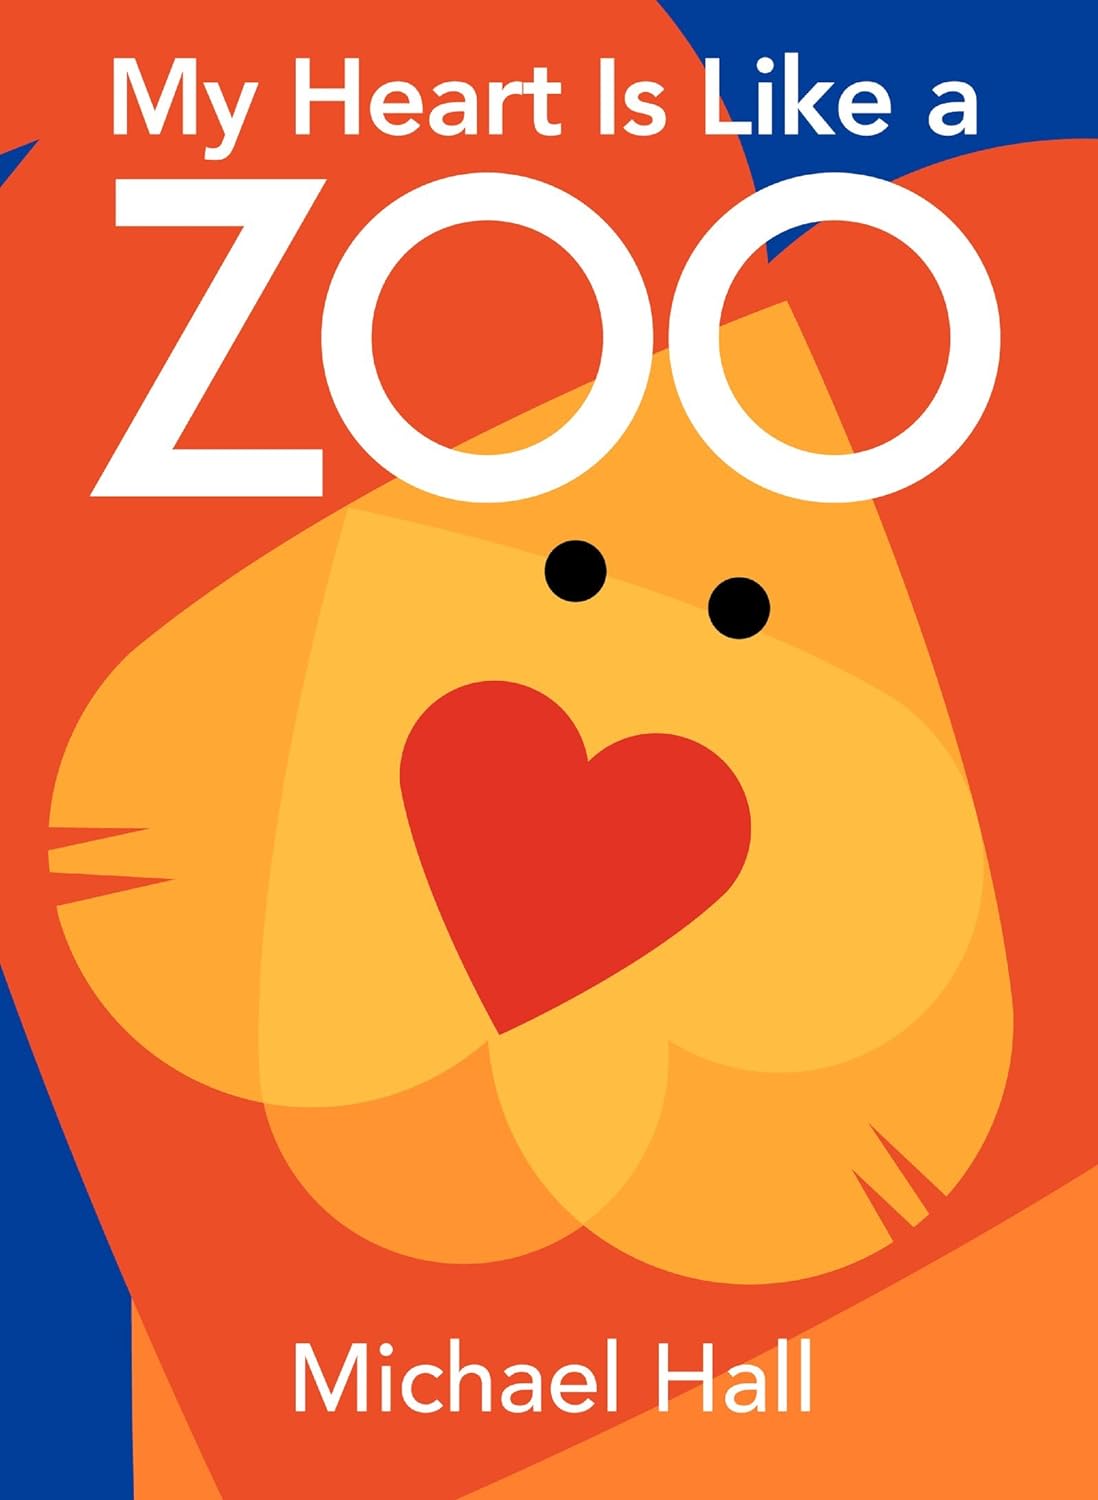 My Heart Is Like A Zoo by Michael Hall